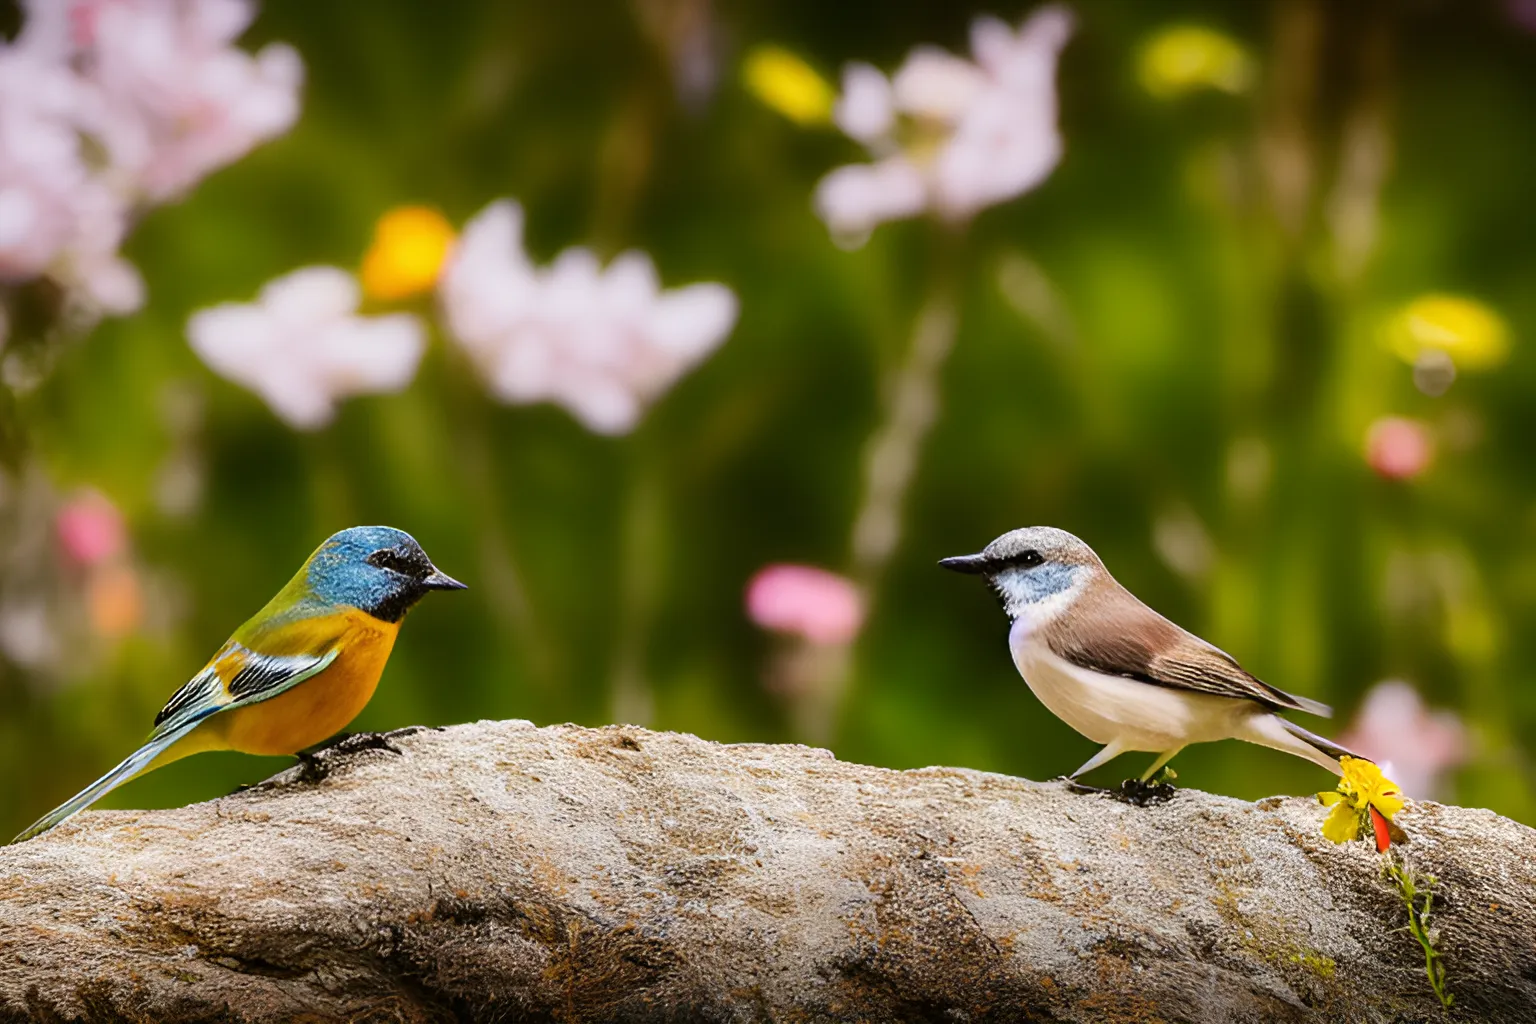 In spring, birds sing and flowers smell